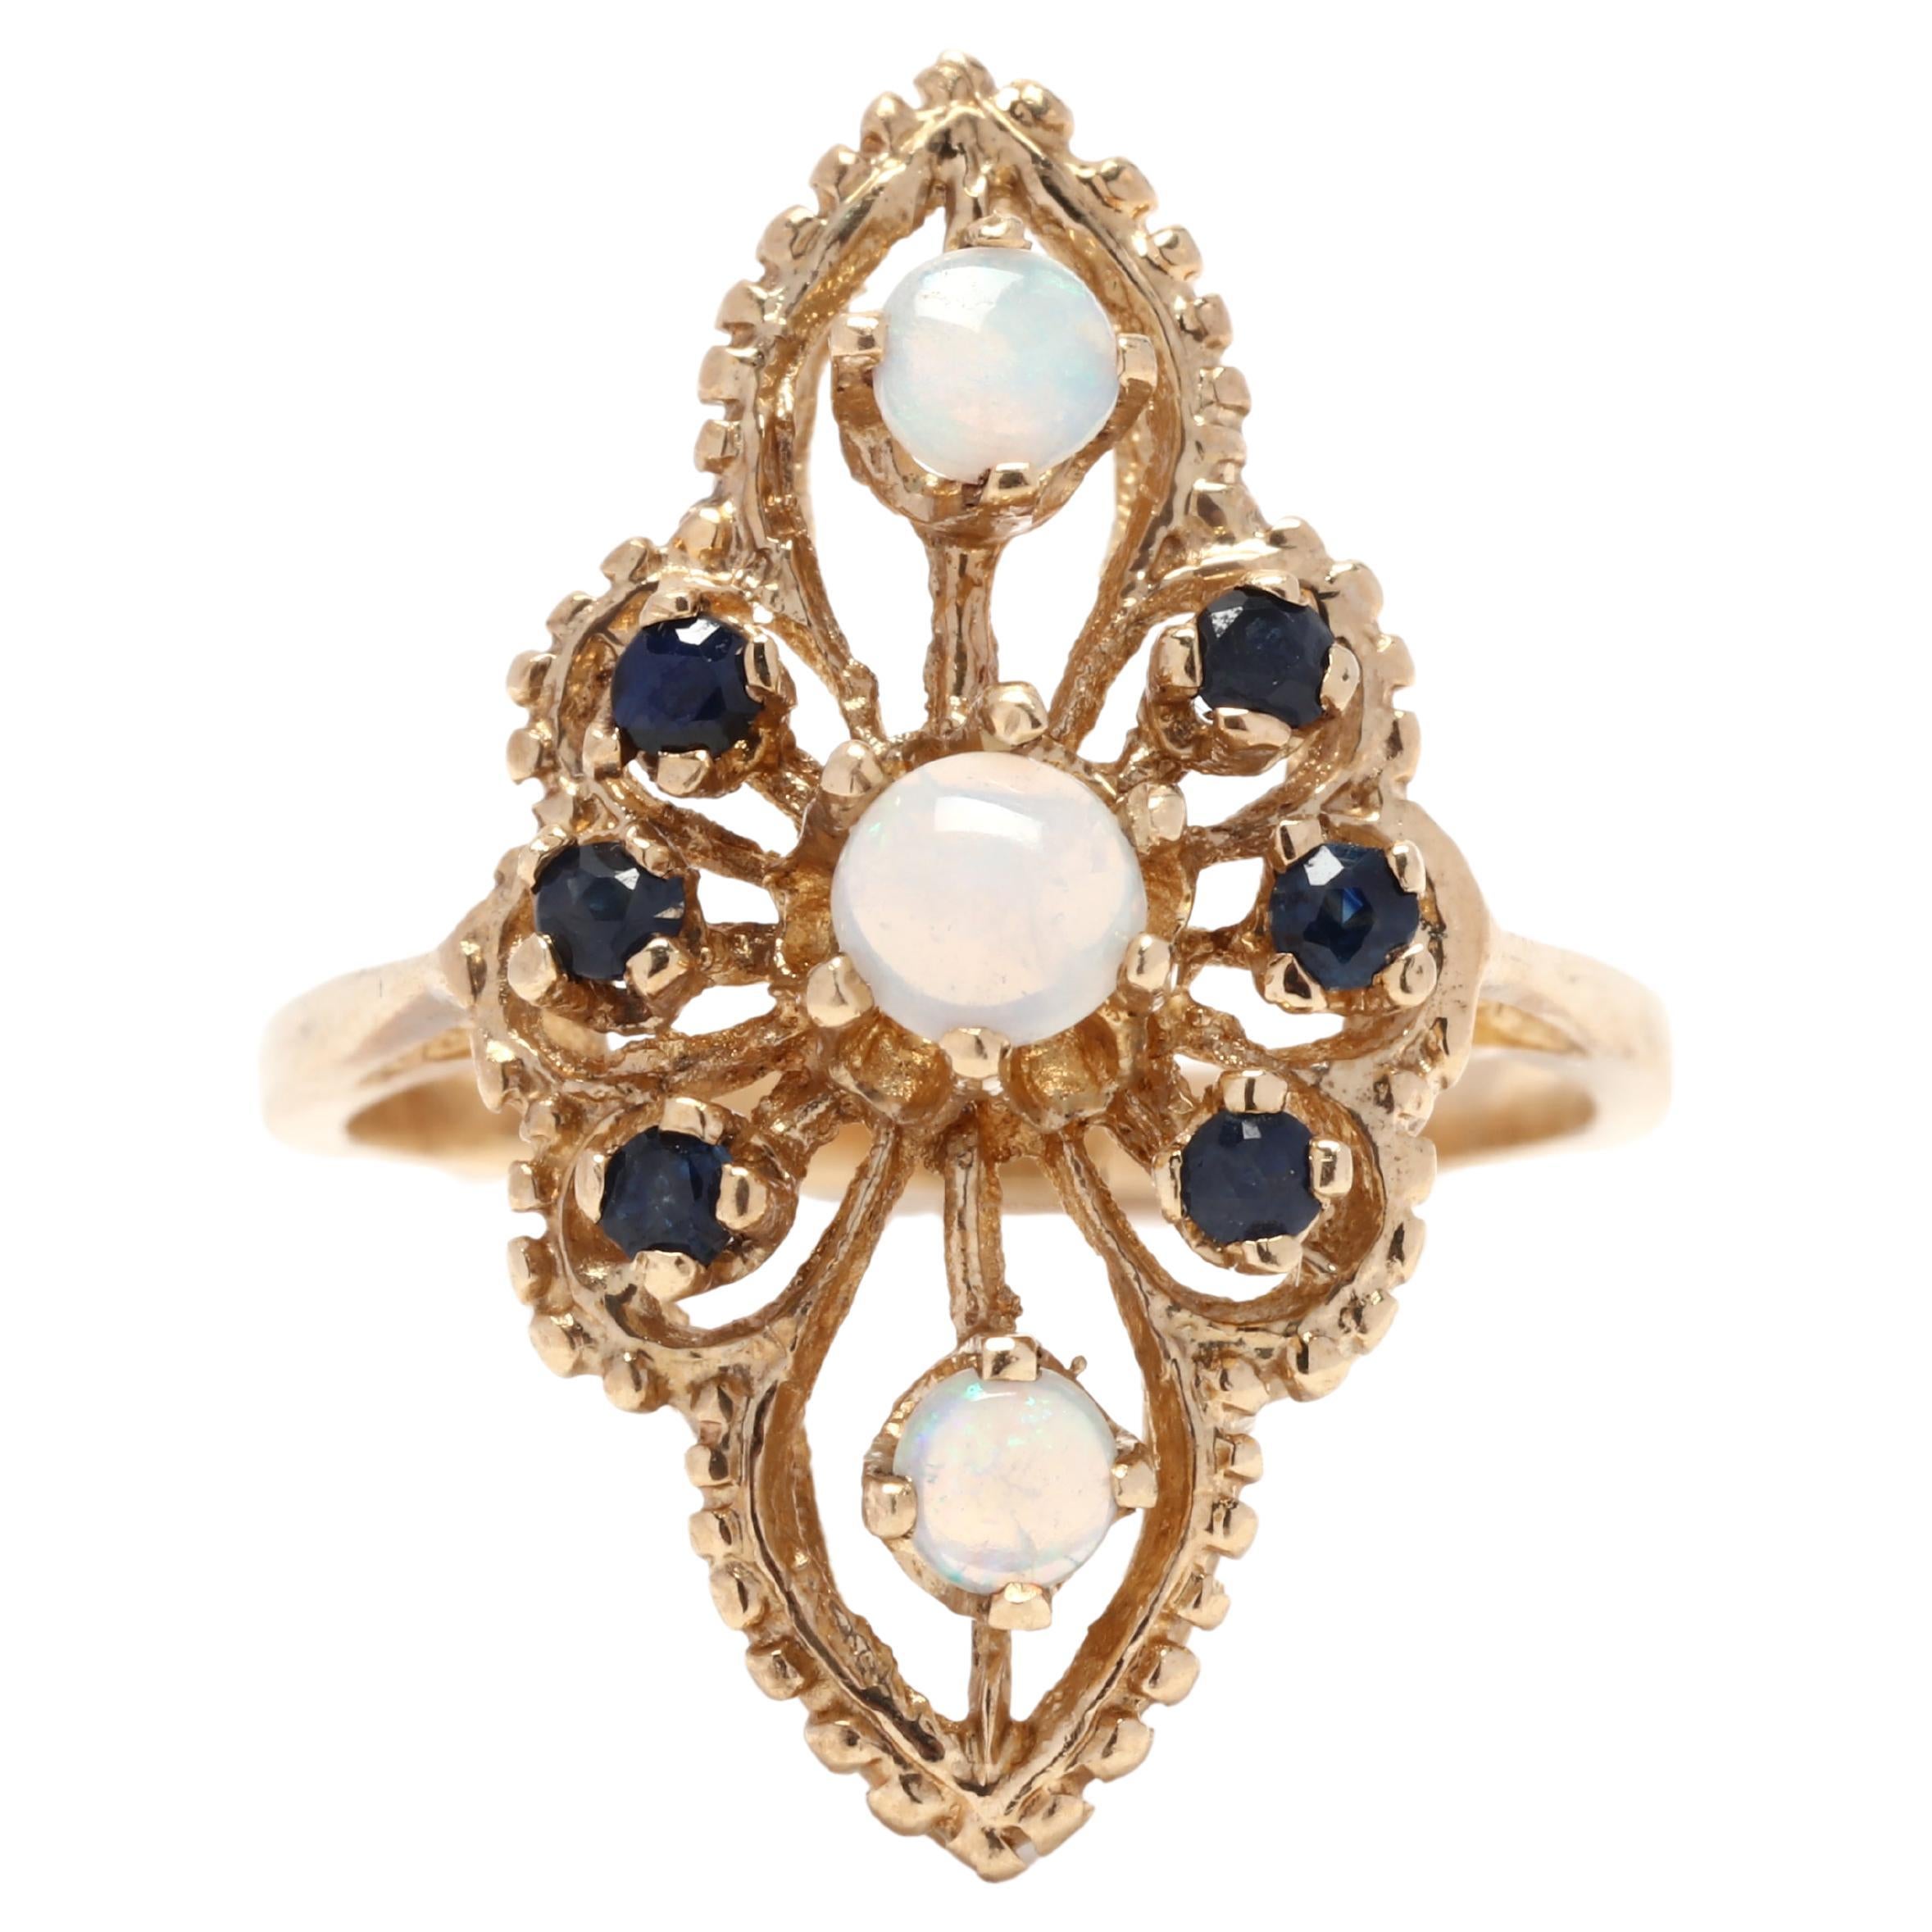 Opal Sapphire Navette Ring, 14K Yellow Gold, Ring Size 6.5, Rainbow Opal Ring